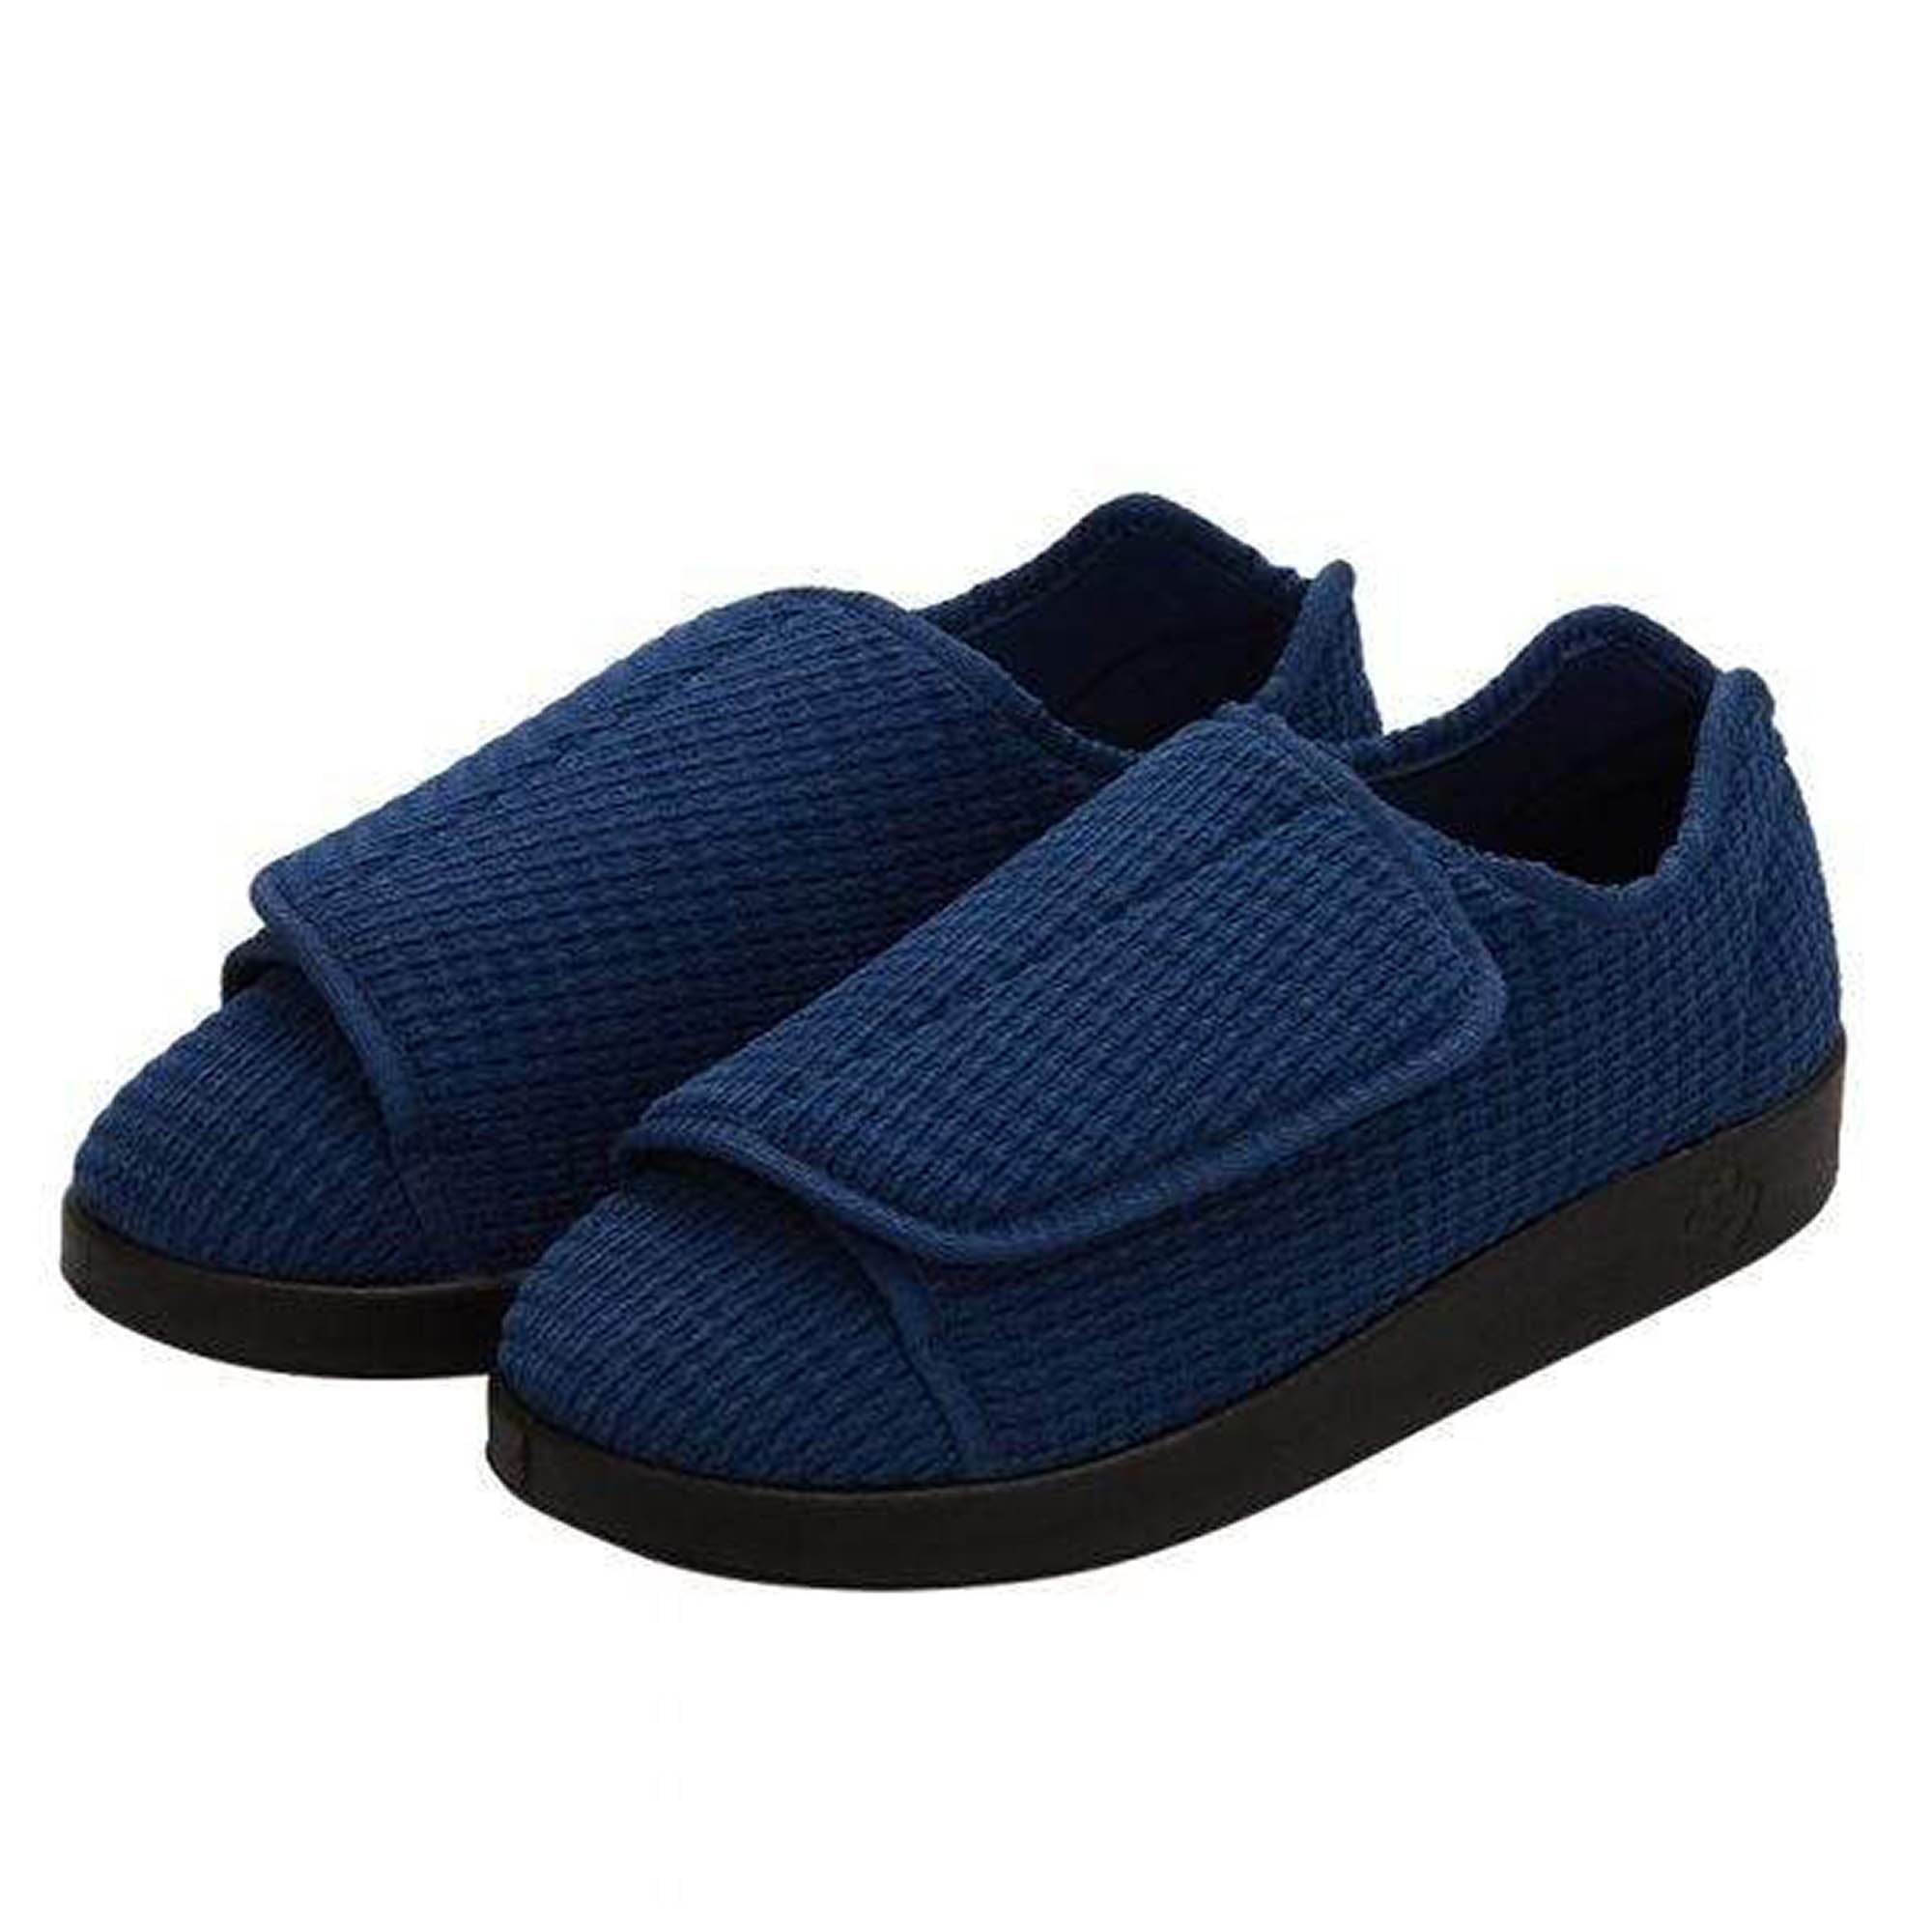 Silverts Men's Extra Extra Wide Slip-Resistant Slippers - Navy - 10